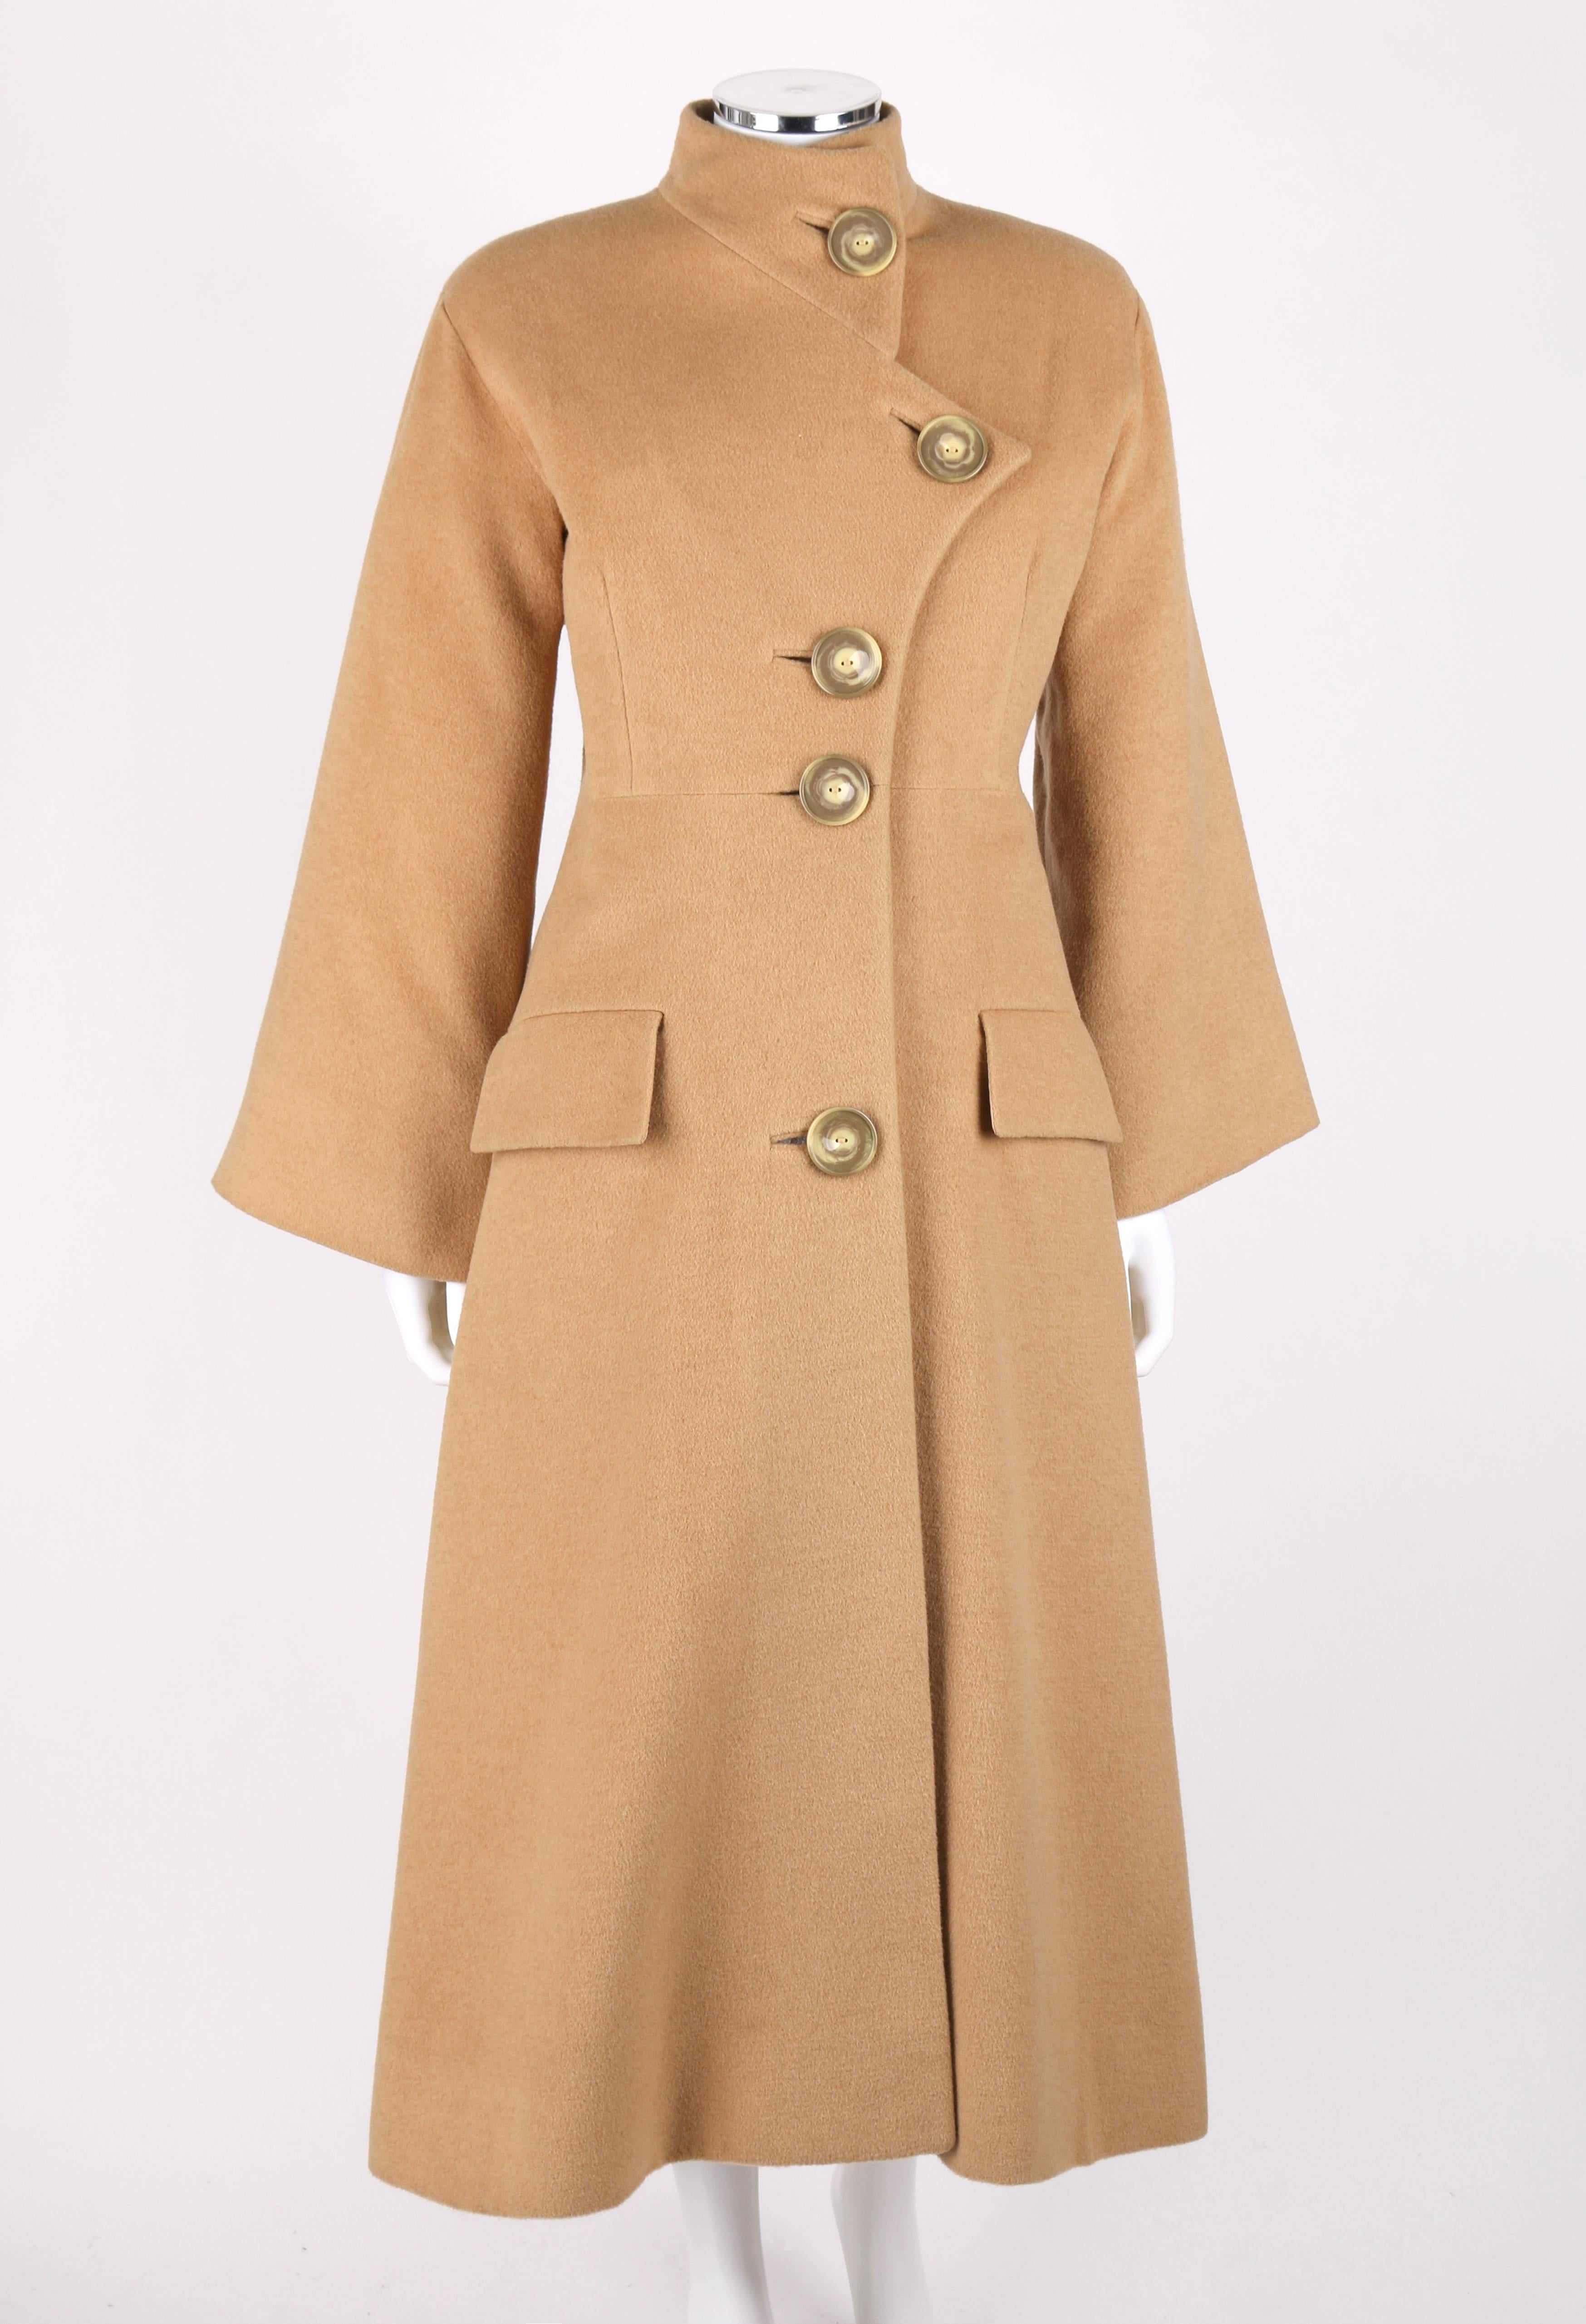 Vintage c.1980's Alik Singer camel cashmere long princess car coat. Asymmetrical notched collar large button front closure, if worn open becomes a symmetrical lapel. Two flap pockets at each hip. Long wide sleeve. Lightly padded shoulder pads. Fully